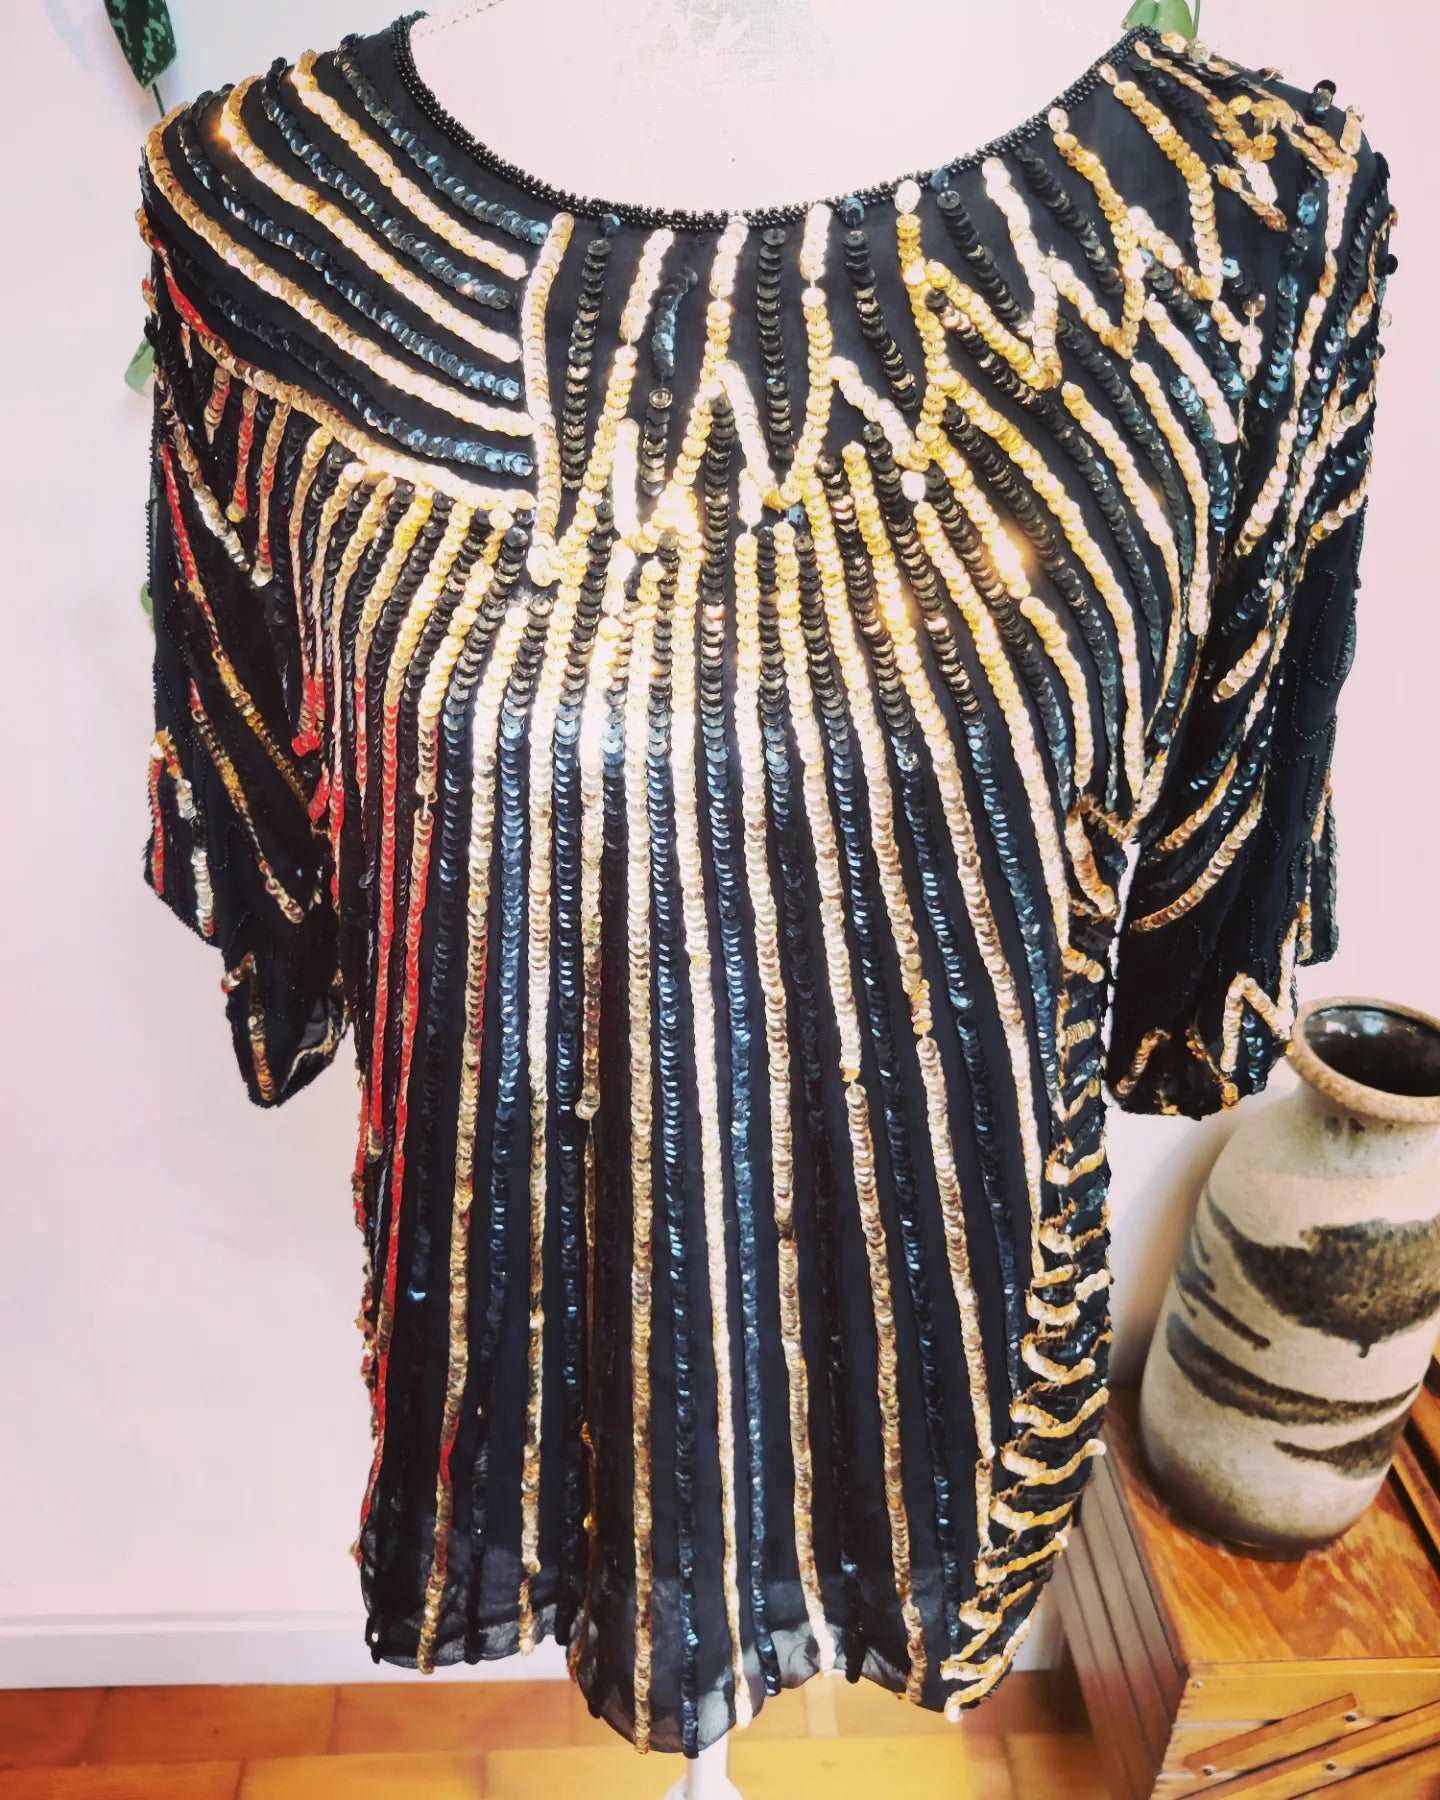 Frank Usher vintage sequin party top. Size 10, 12, 14. Black and gold.